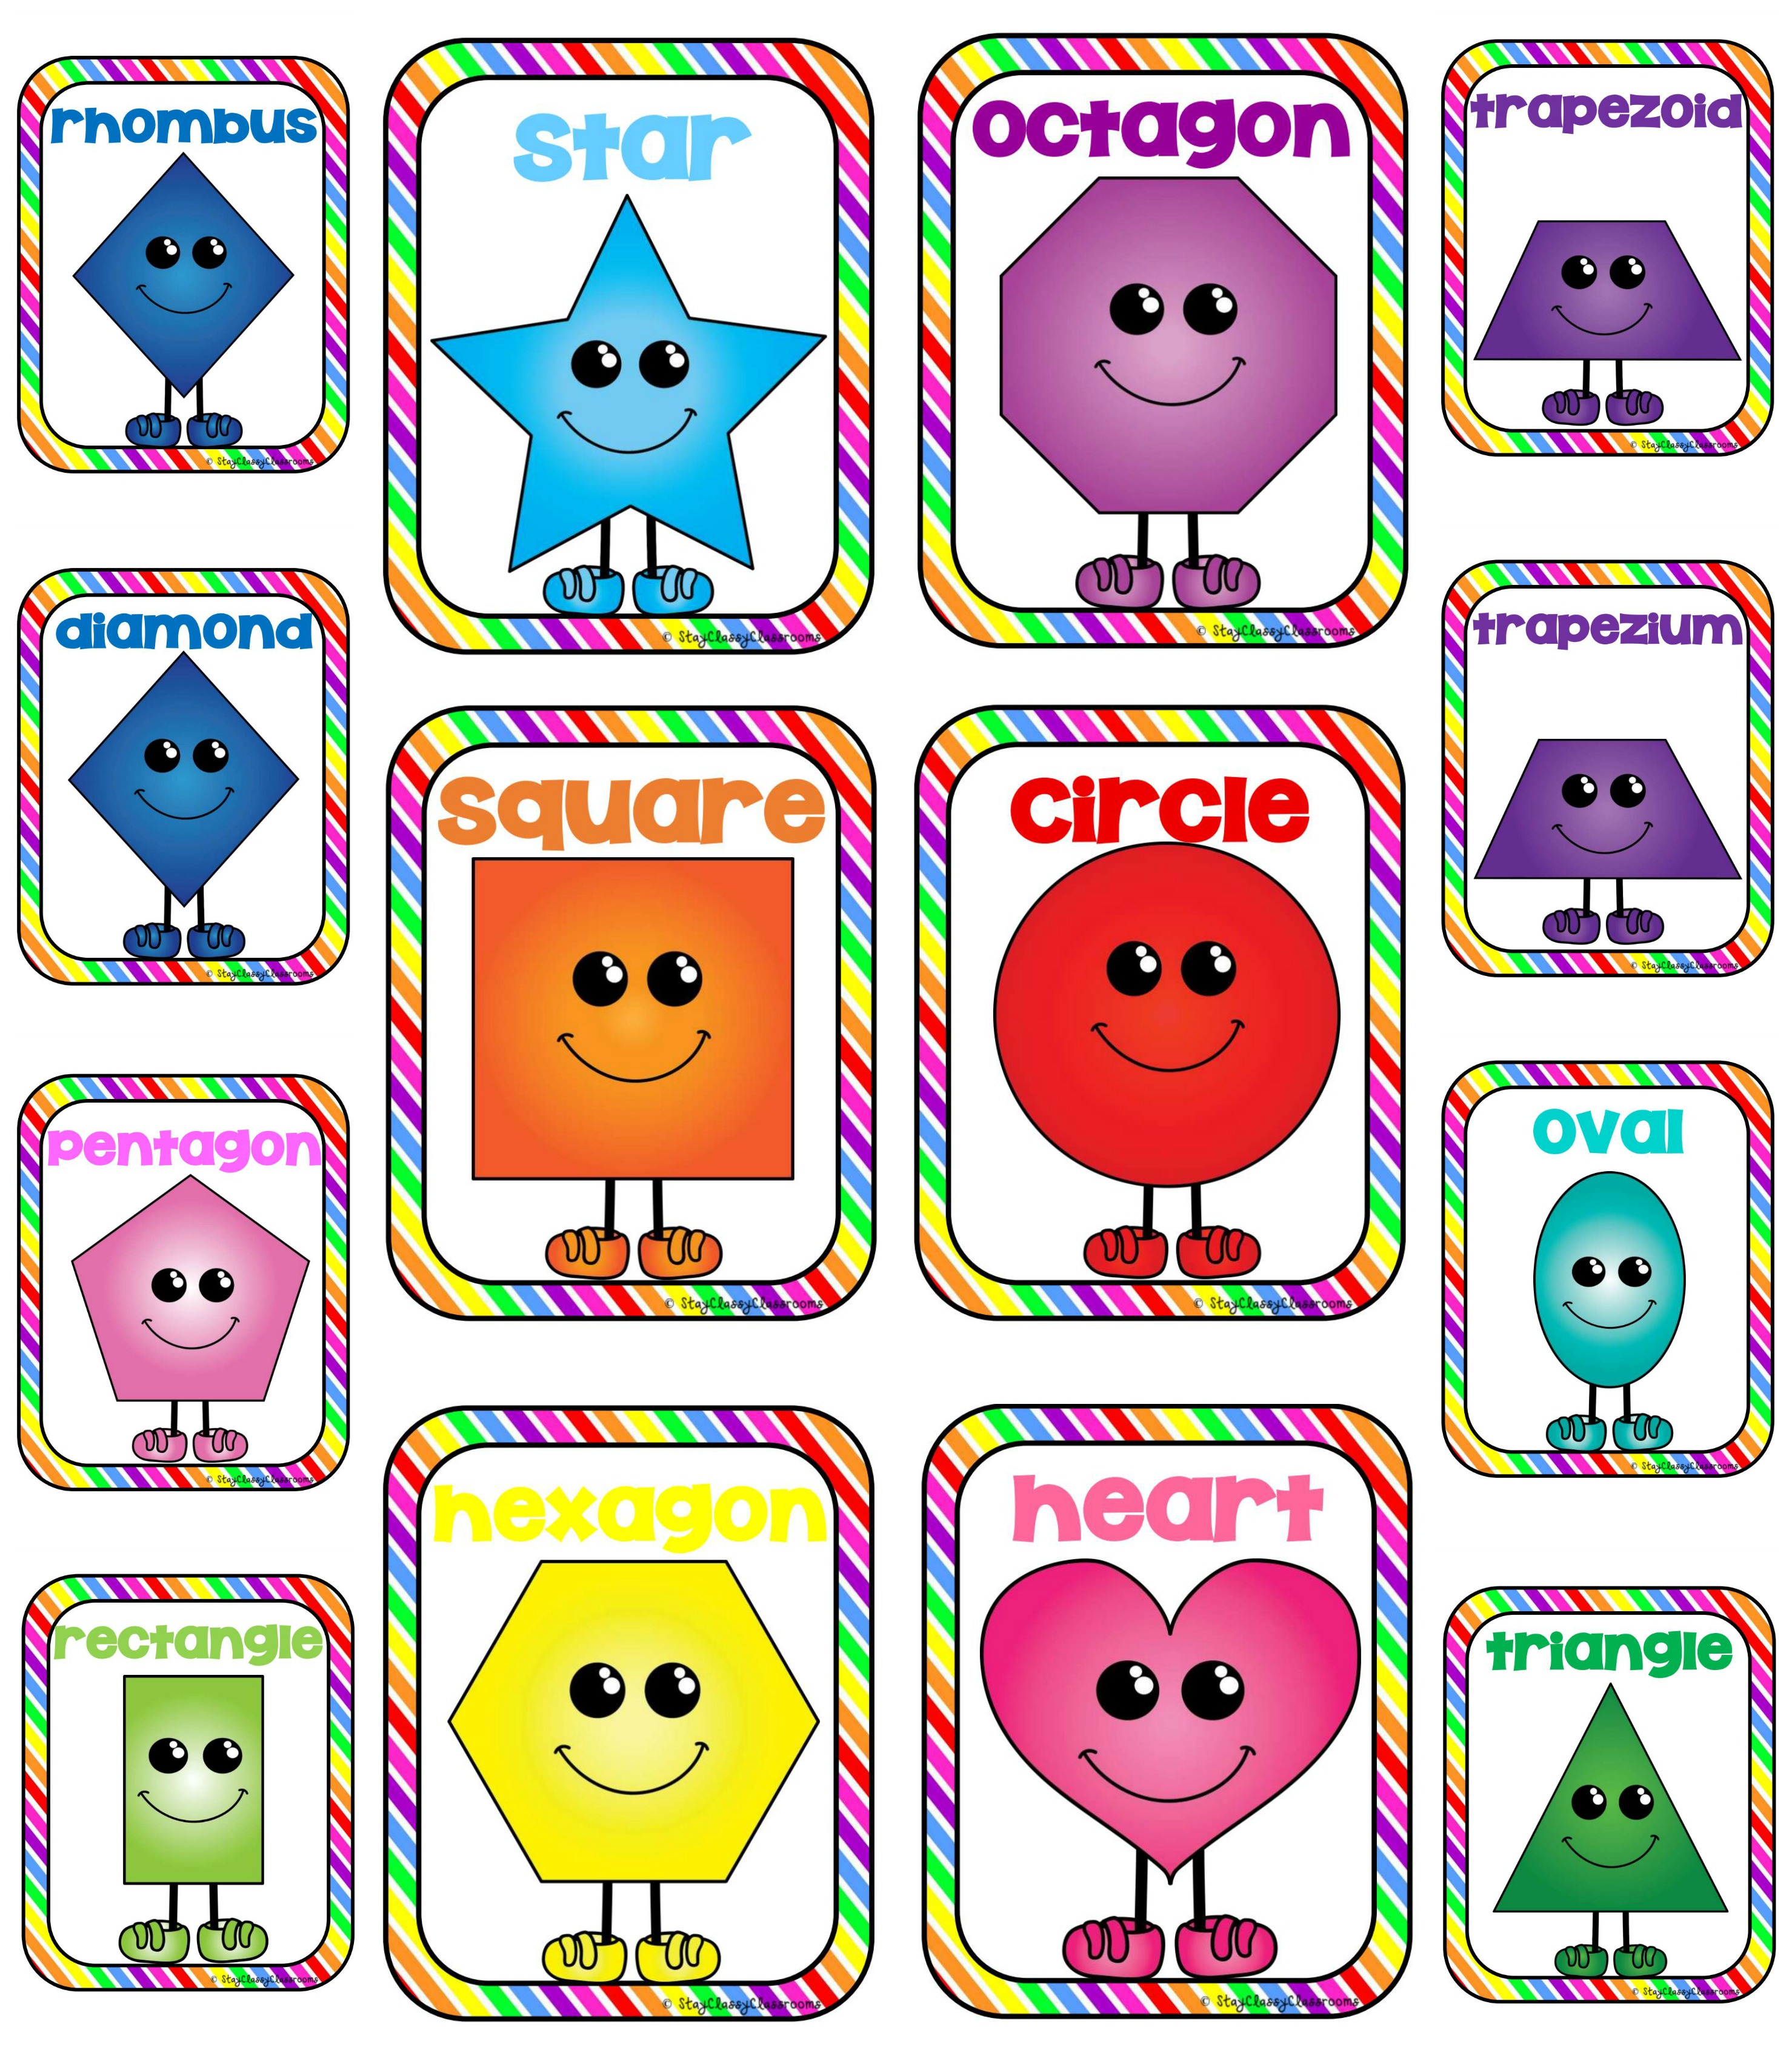 clipart shapes name